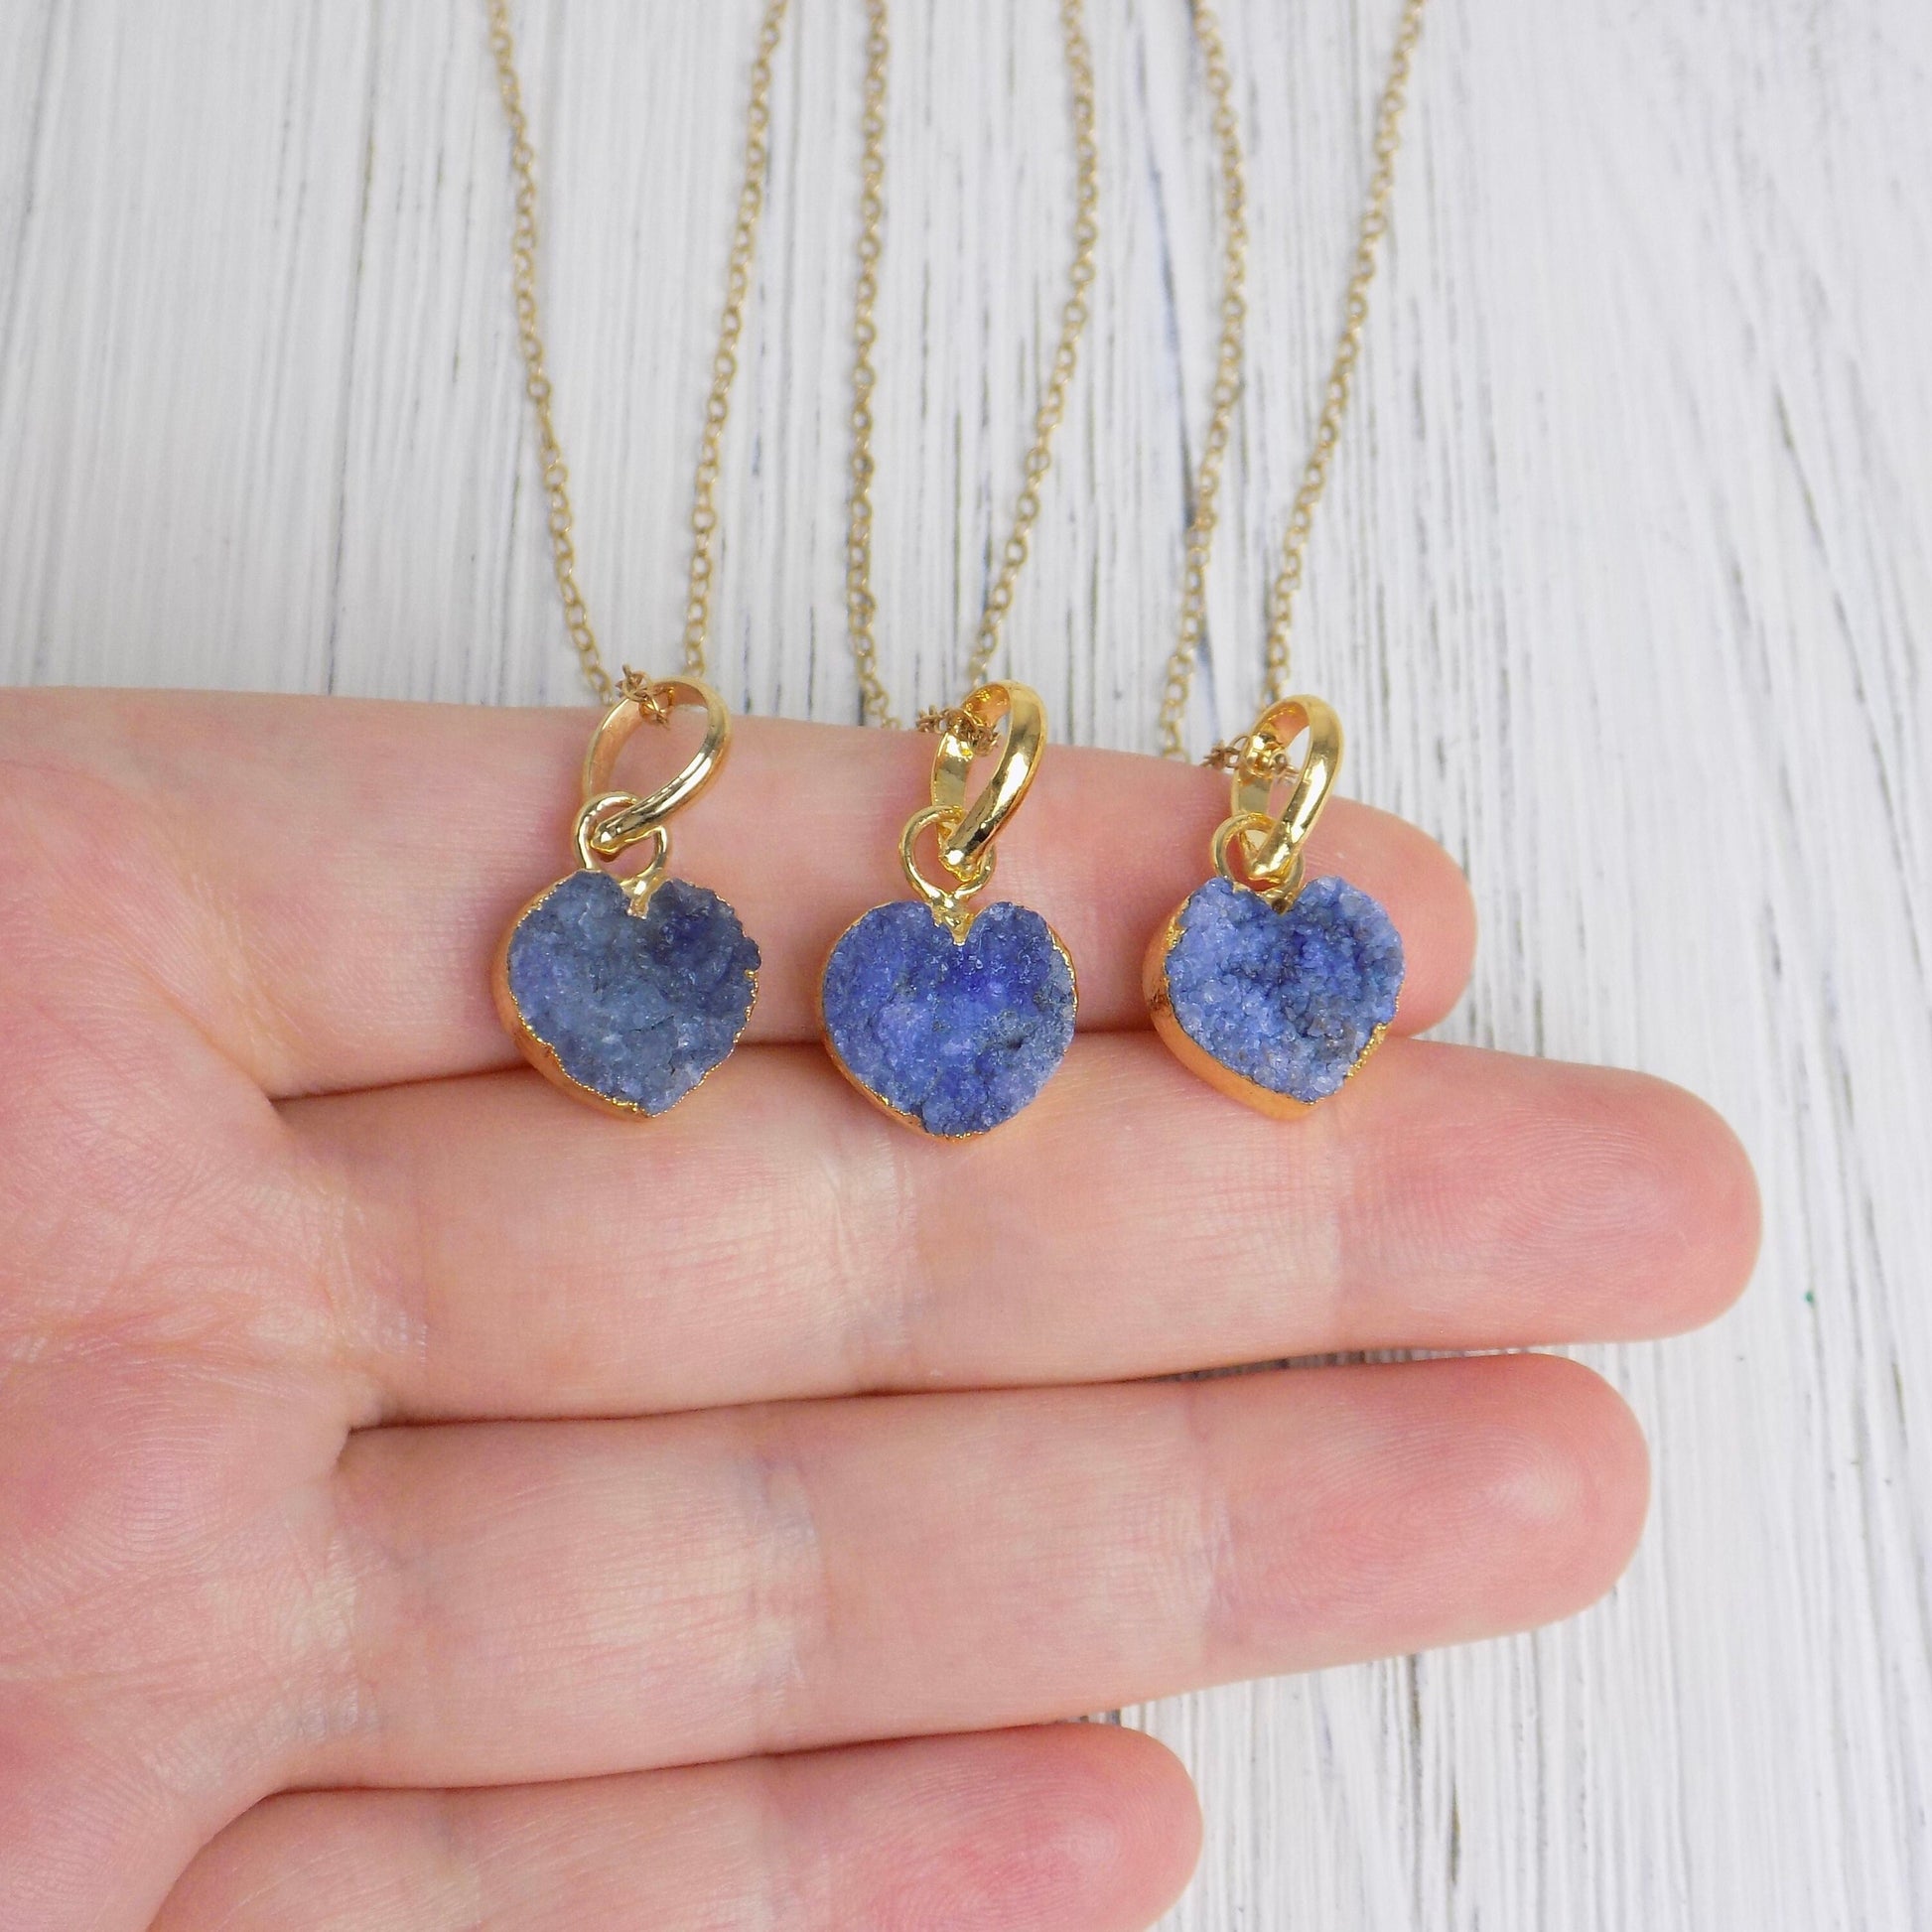 Small Heart Necklace Gold, Blue Druzy Necklace, Minimalist Layering Crystal, Gifts For Mom, M6-161